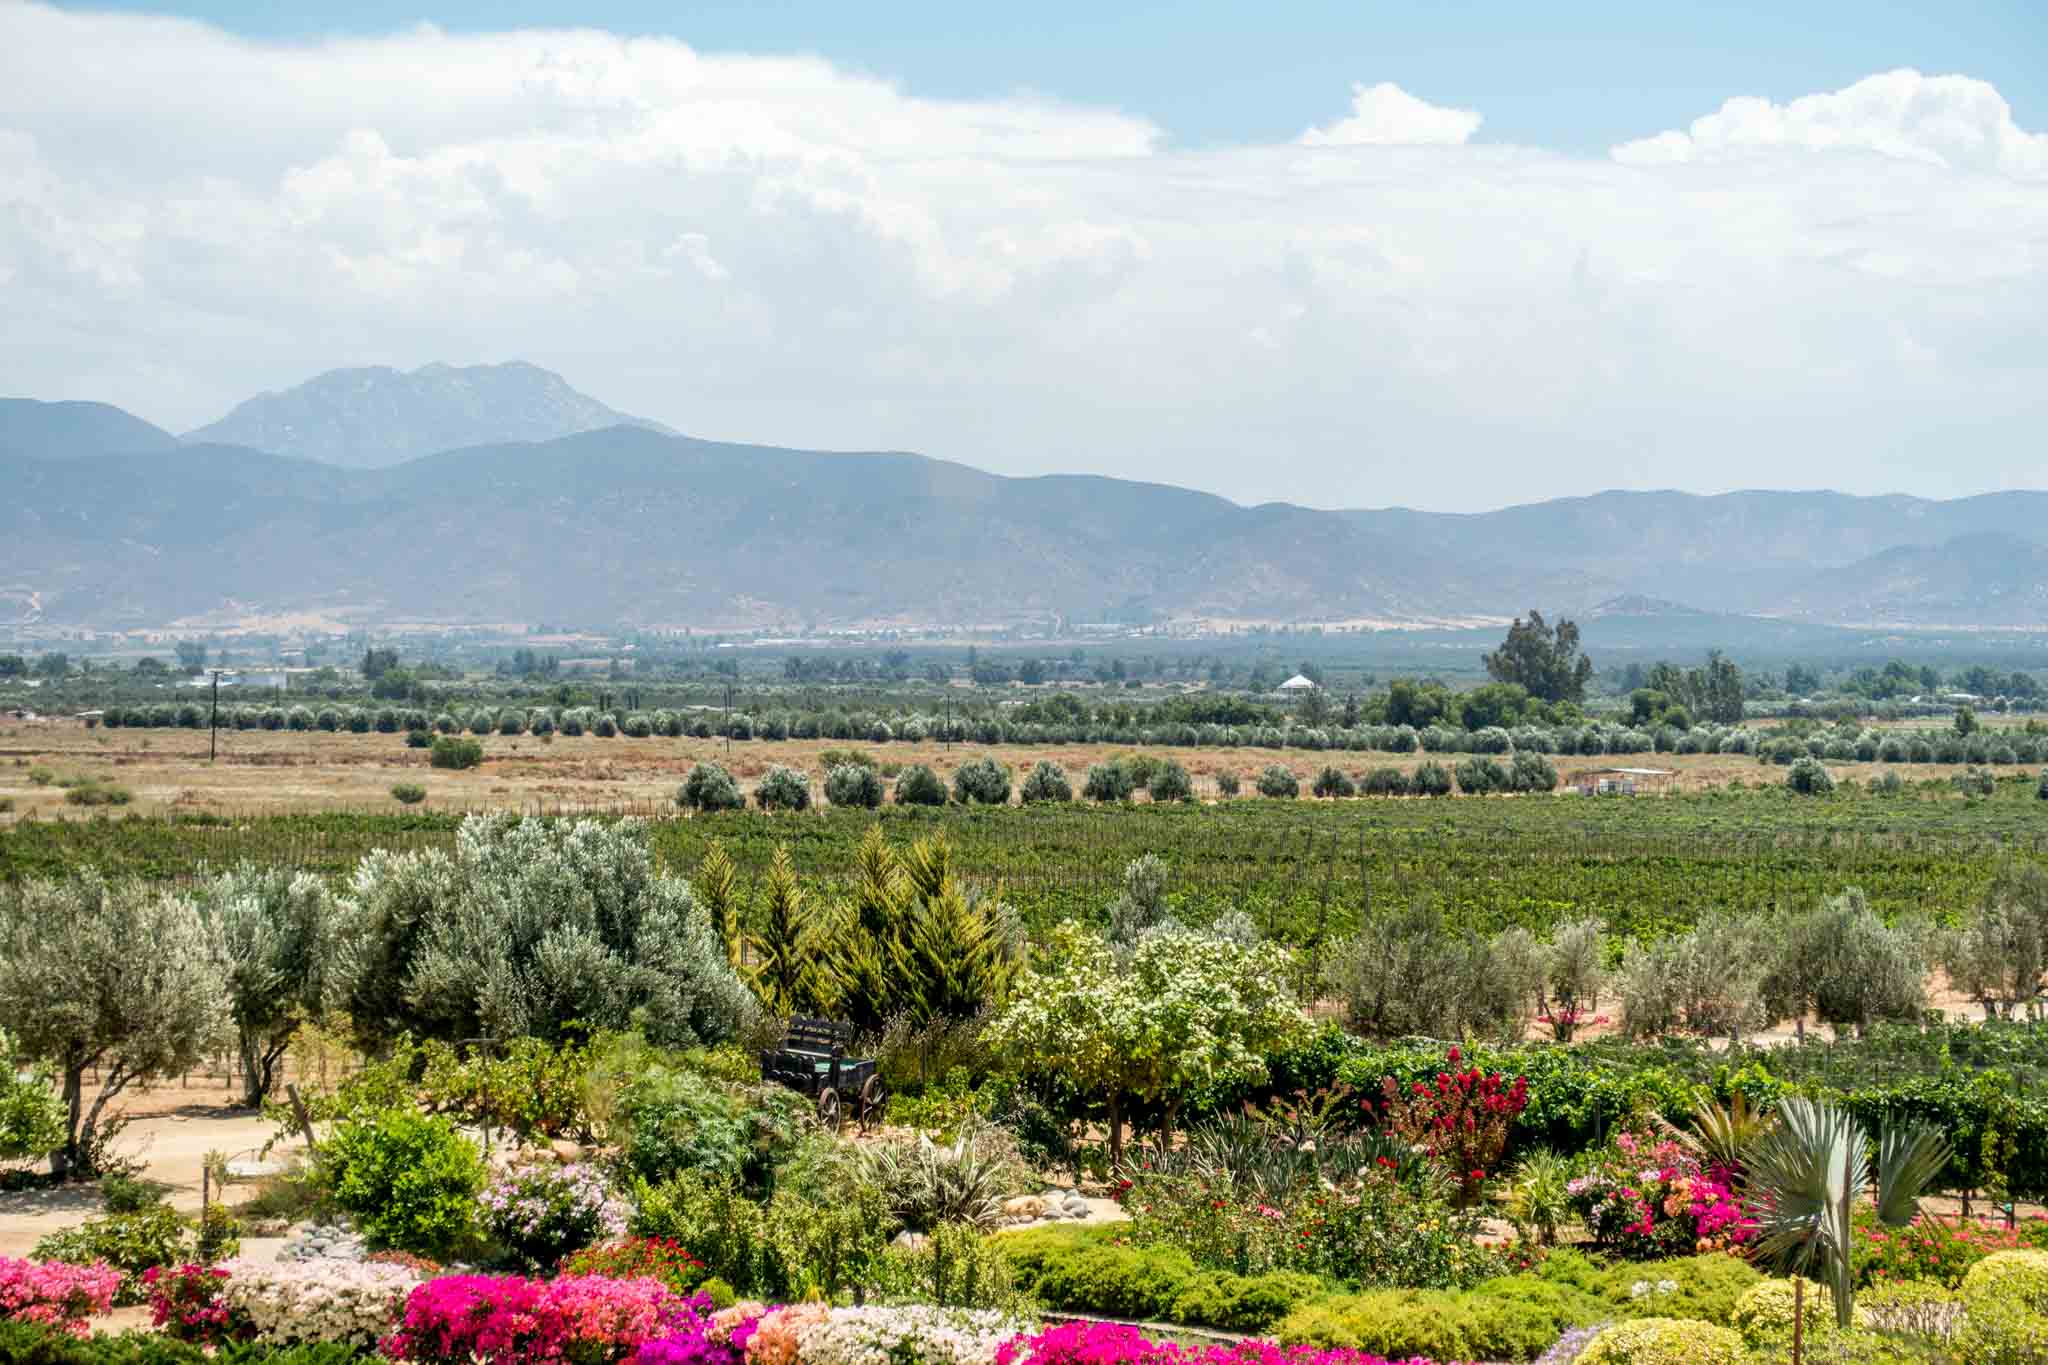 The hills and vineyards of the Valle de Guadalupe in Mexico